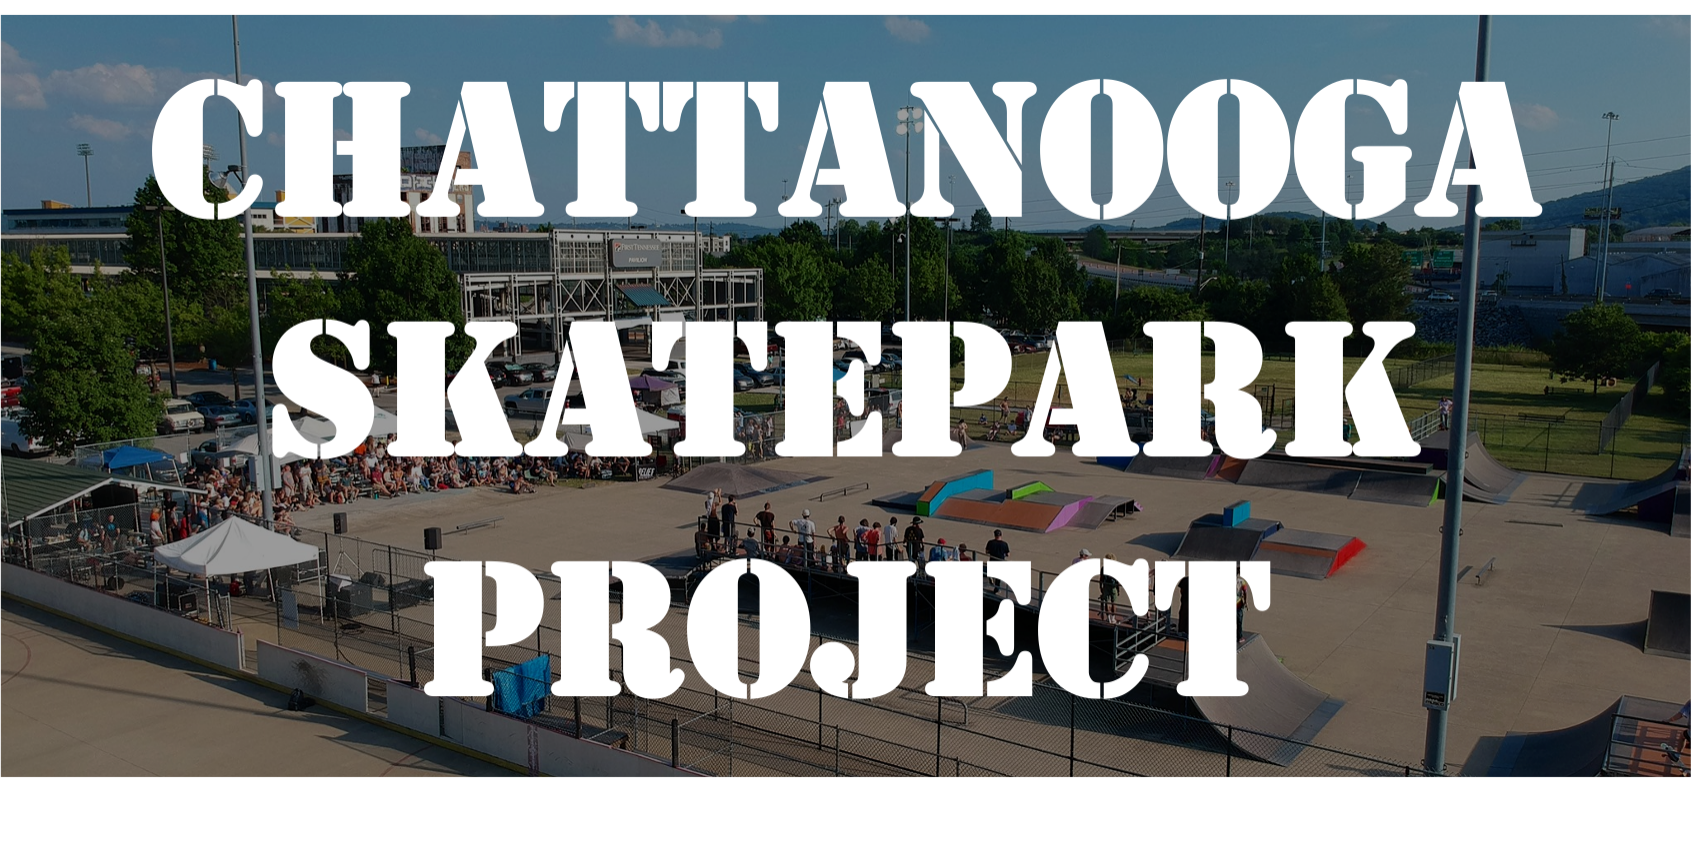 Photo of skating competition at Chatt Town Skatepark with text "Chattanooga Skatepark Project"